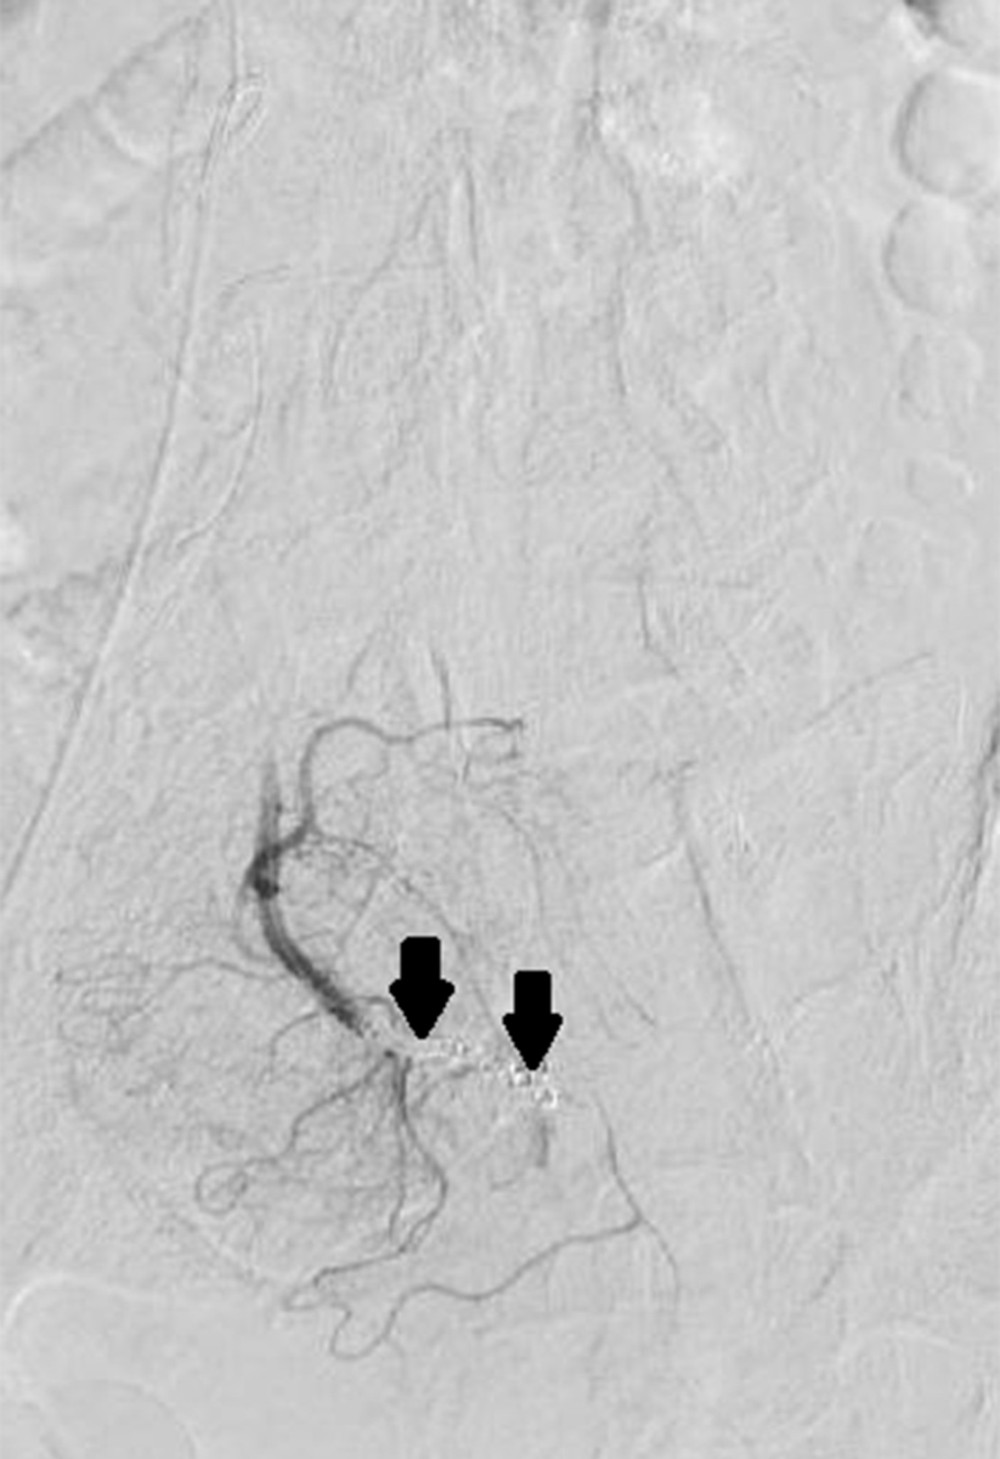 Control of superior rectal artery pseudoaneurysm after coil embolization. Inferior mesenteric artery angiographic imaging revealing the cessation of flow to the superior rectal artery pseudoaneurysm following successful coil embolization of the supplying vessel. This imaging shows no further active contrast blush, and the site of the coil embolization is indicated by black arrows.